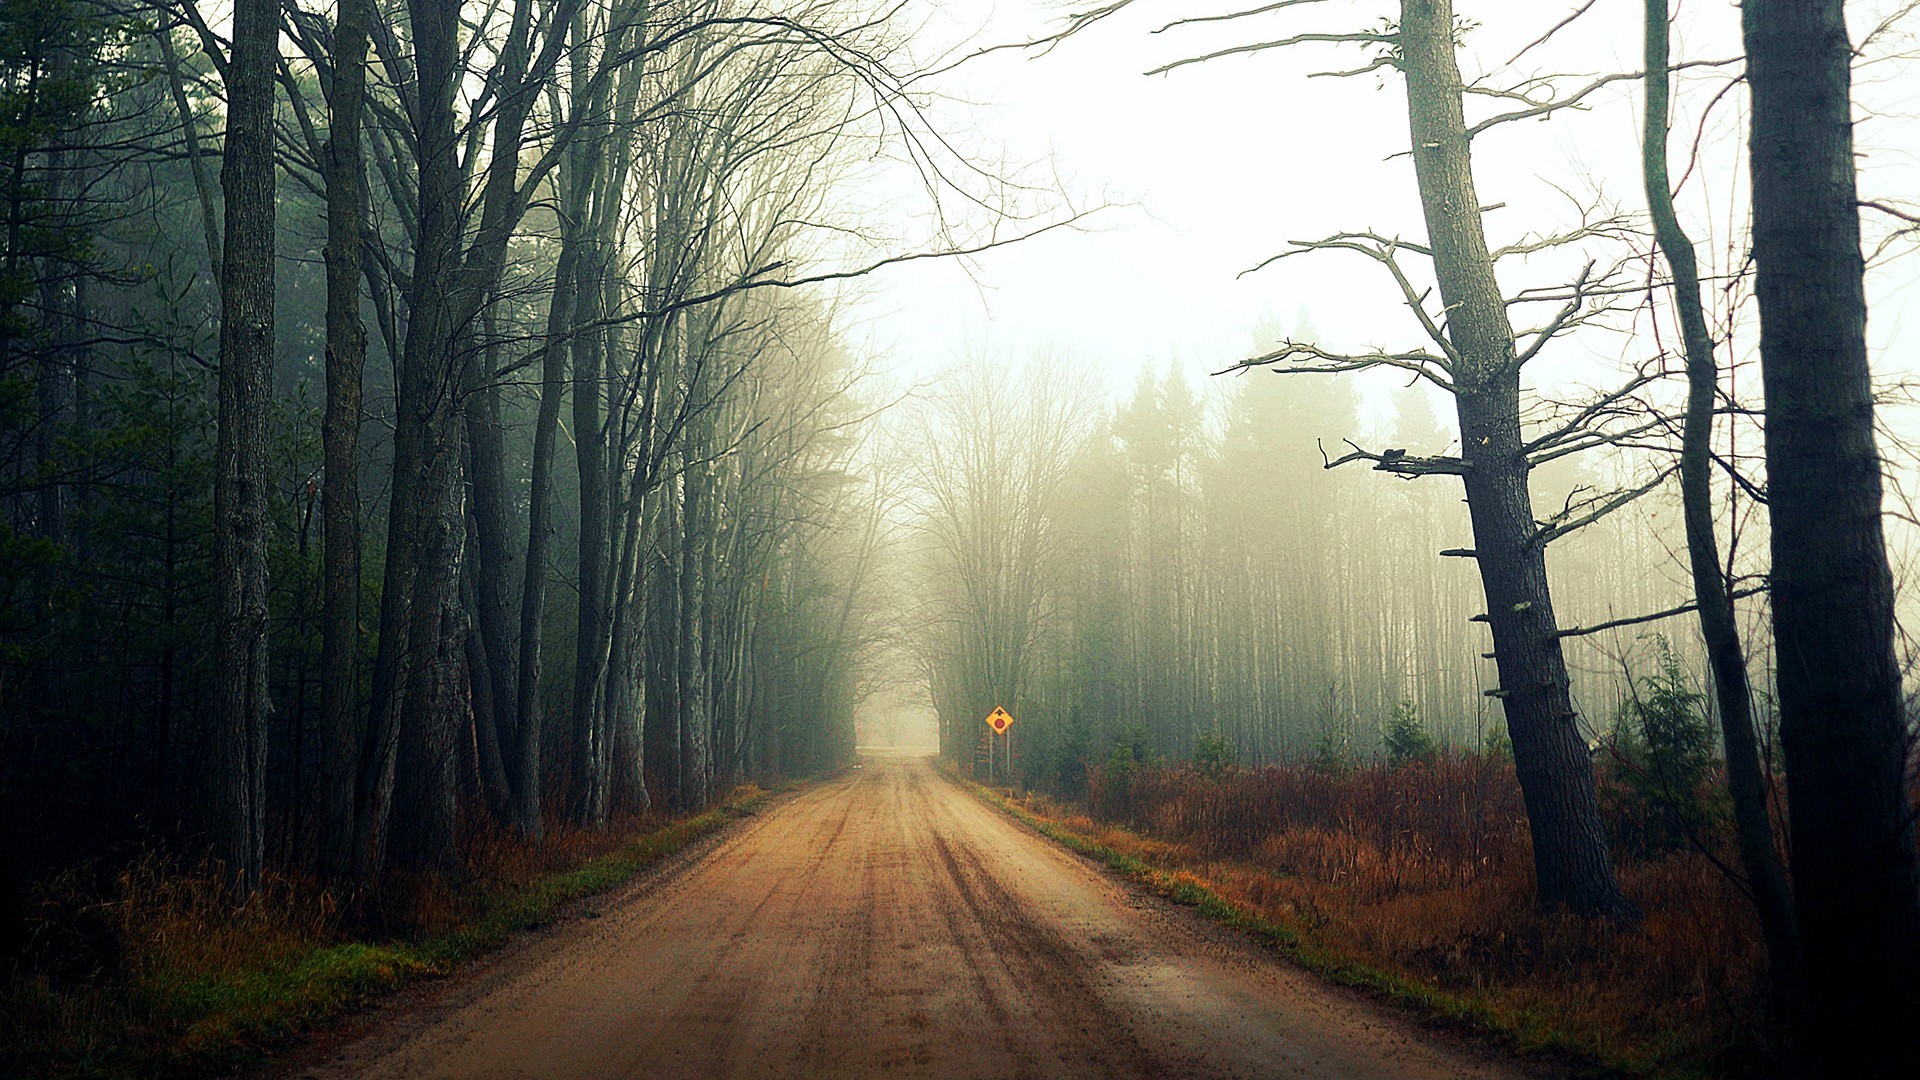 General 1920x1080 road trees forest nature landscape dirt road mist outdoors